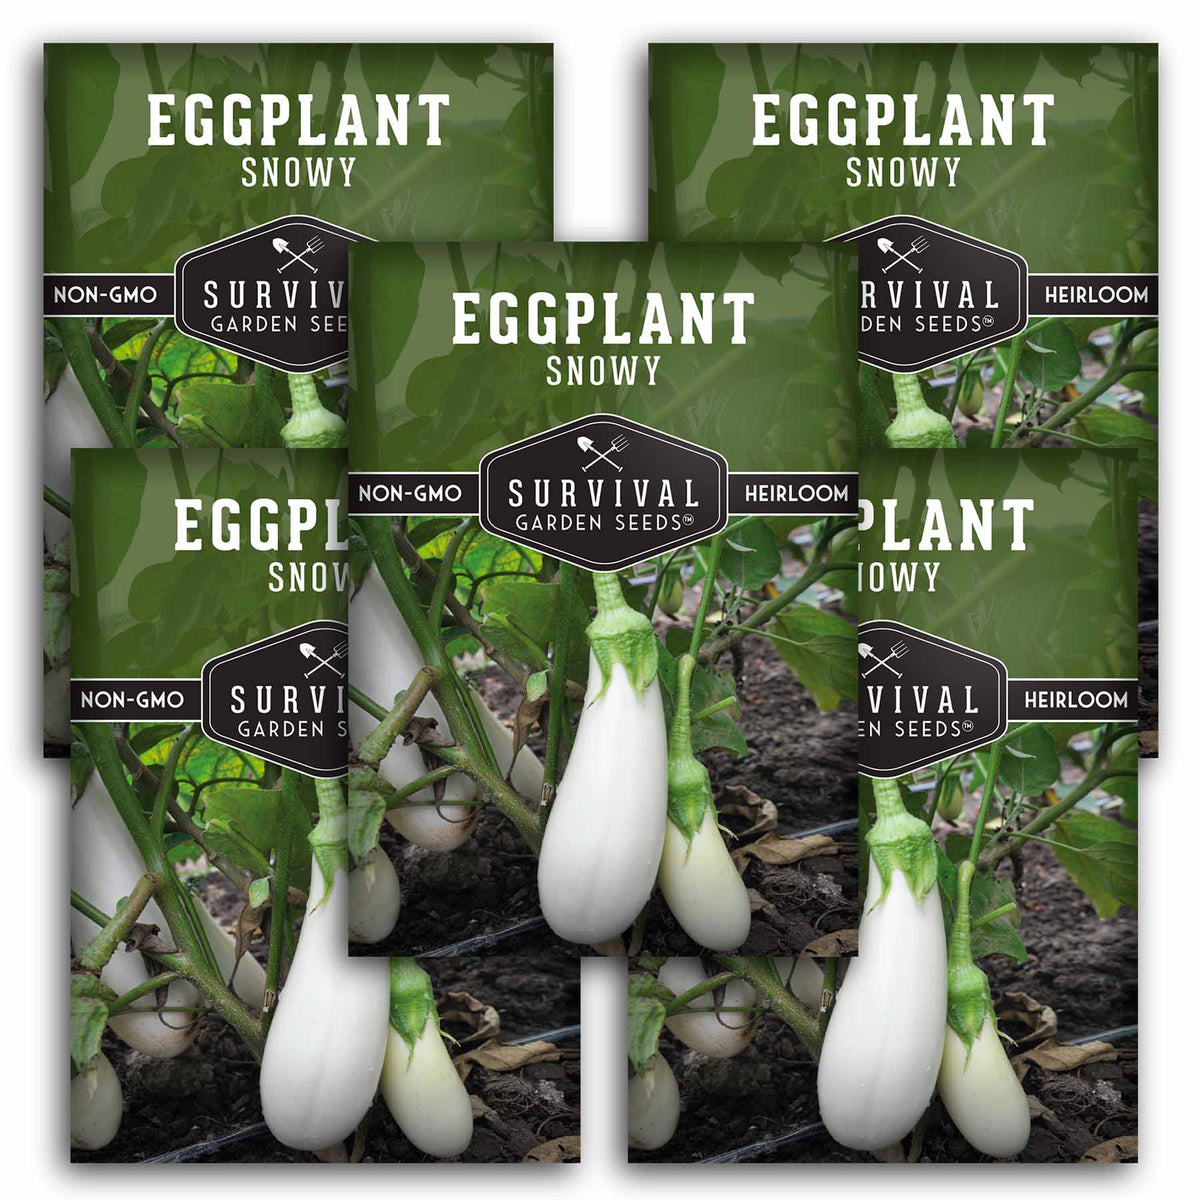 5 packets of Snowy Eggplant seeds